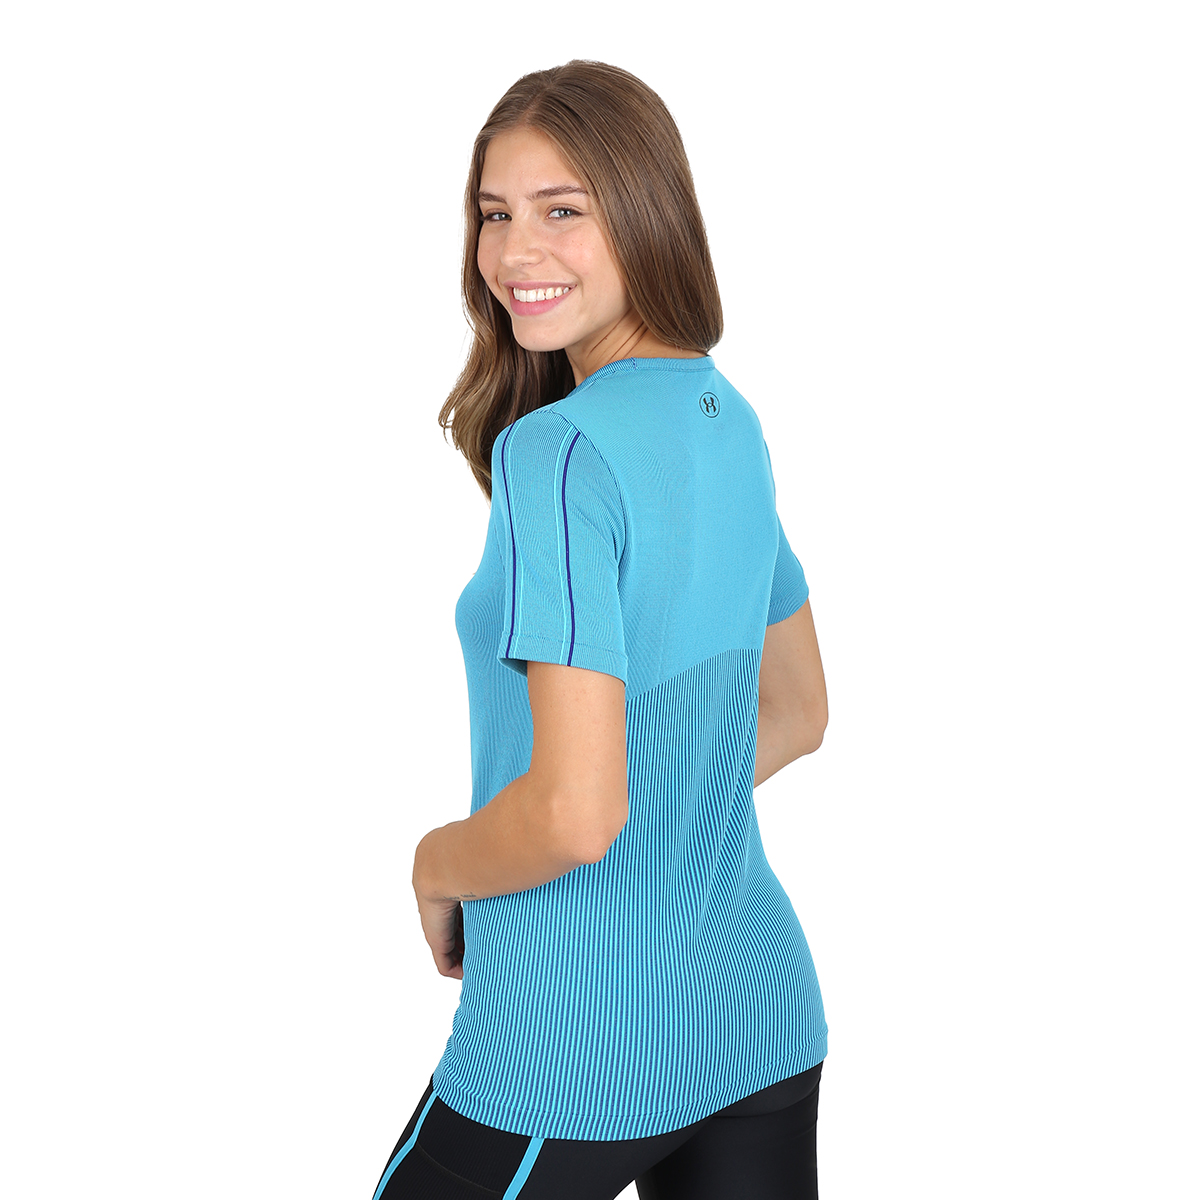 Remera Entrenamiento Under Armour Rush Mujer,  image number null